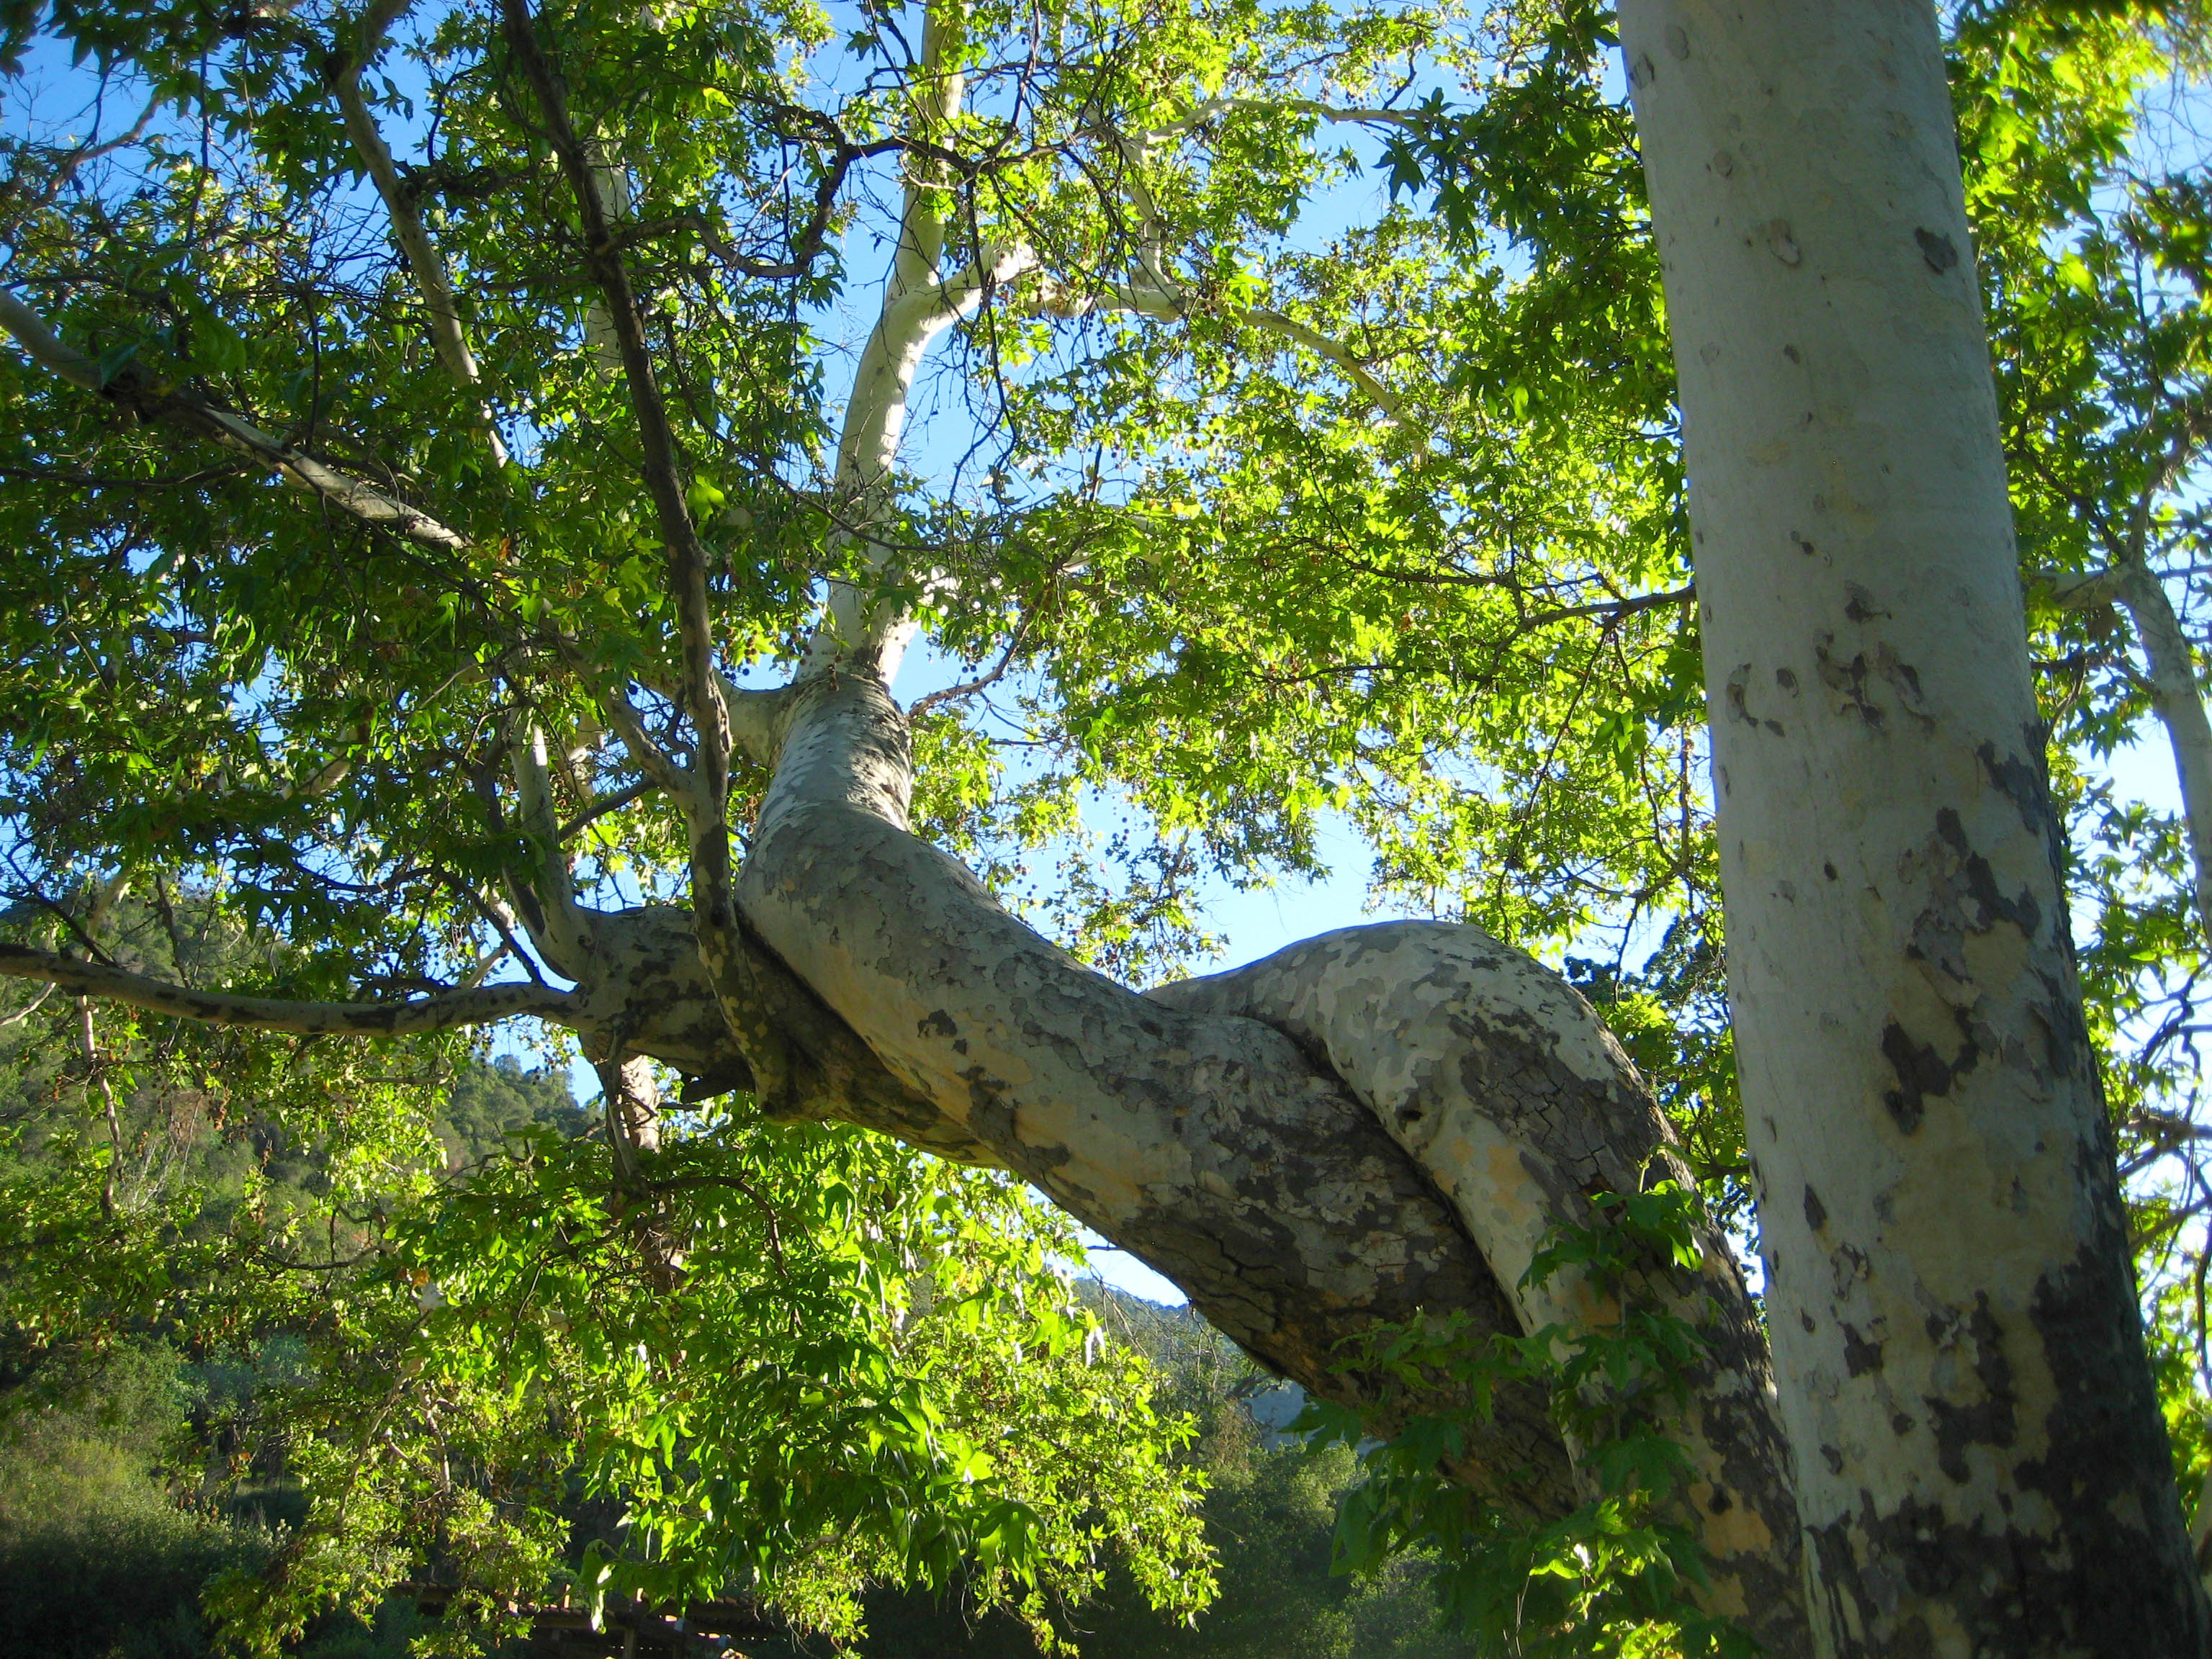 Sycamore tree trunks intertwined - Arroyo Seco 4:13:14 (IMG_2877 ...